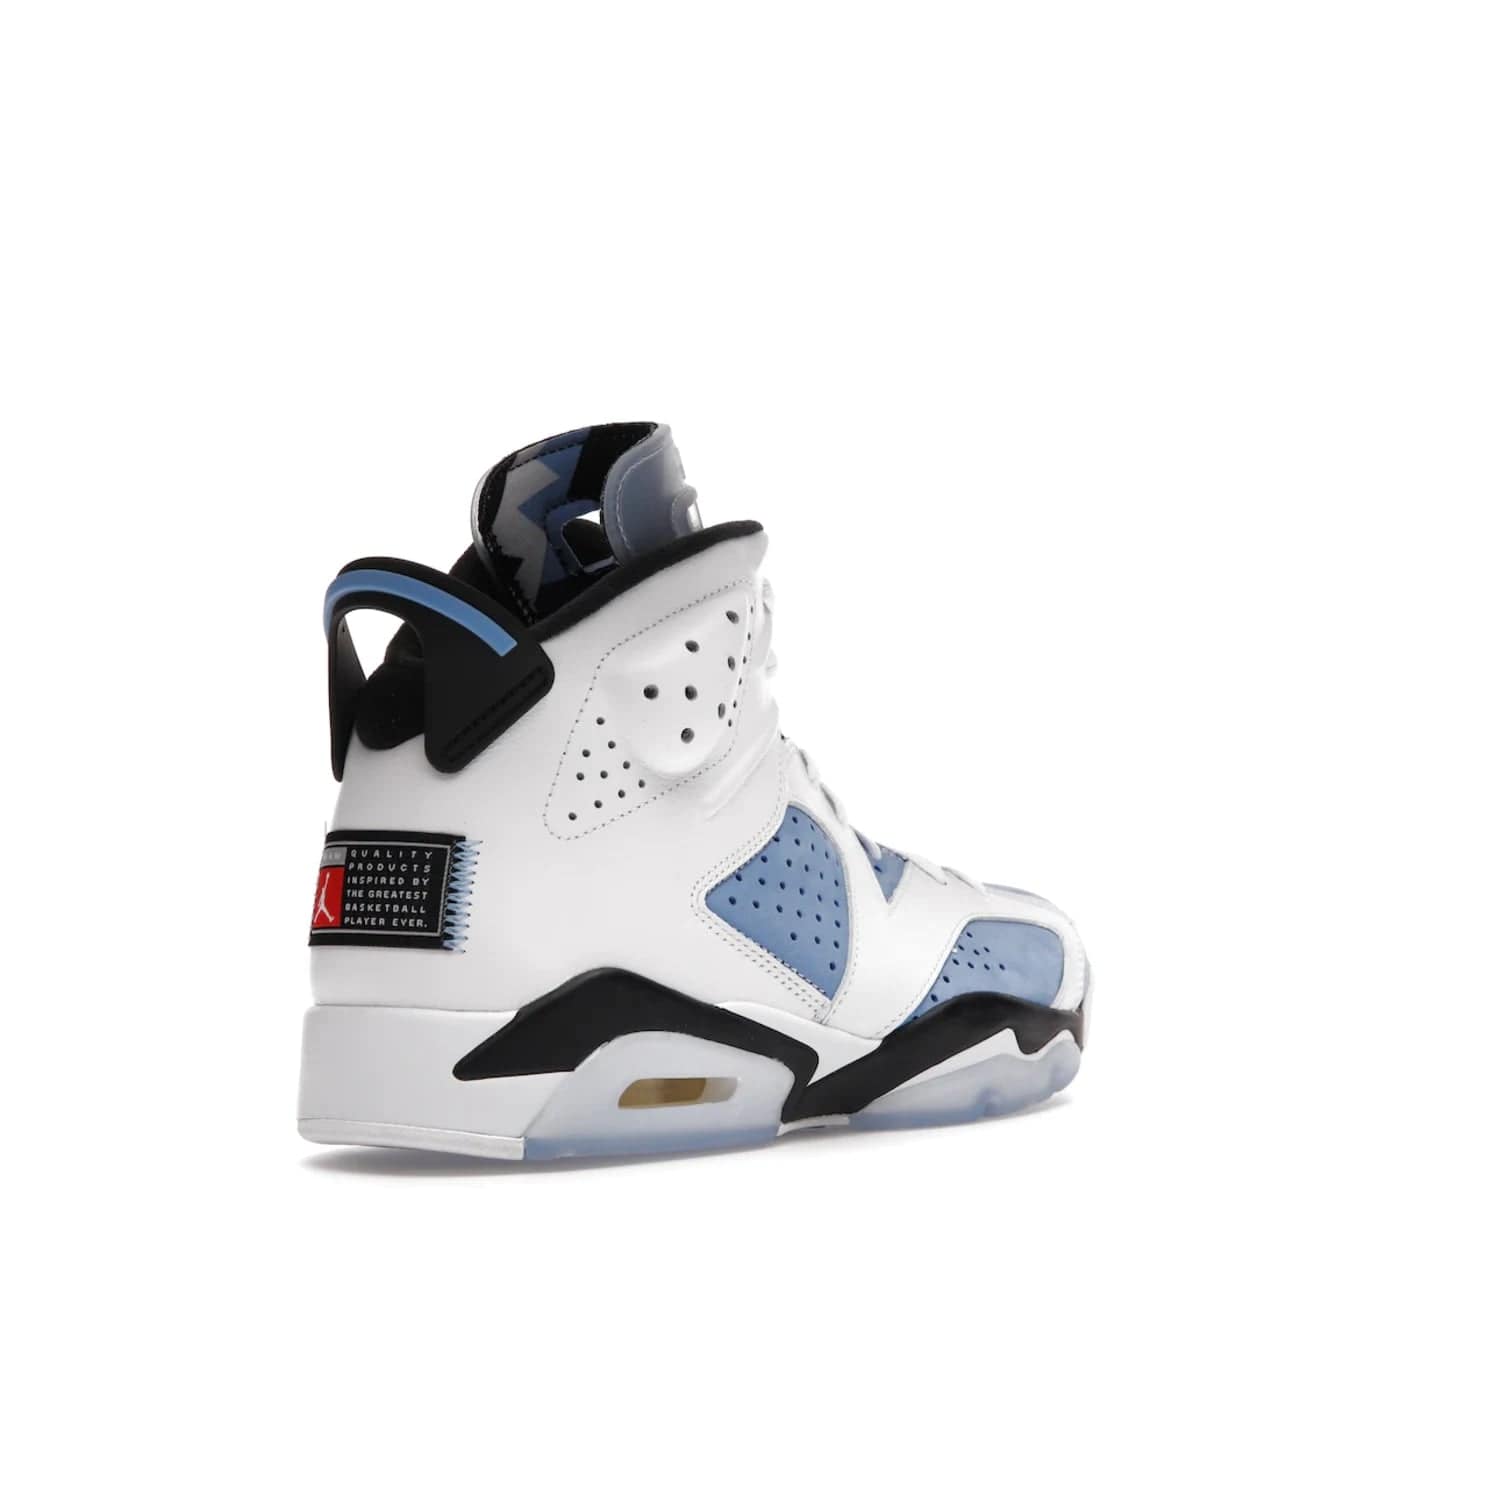 Jordan 6 Retro UNC White - Image 32 - Only at www.BallersClubKickz.com - Air Jordan 6 Retro UNC White with classic UNC colors brings nostalgia and style to a legendary silhouette. Celebrate MJ's alma mater with navy blue accents, icy semi-translucent sole and Jordan Team patch. Out March 2022 for the Sneaker Enthusiast.